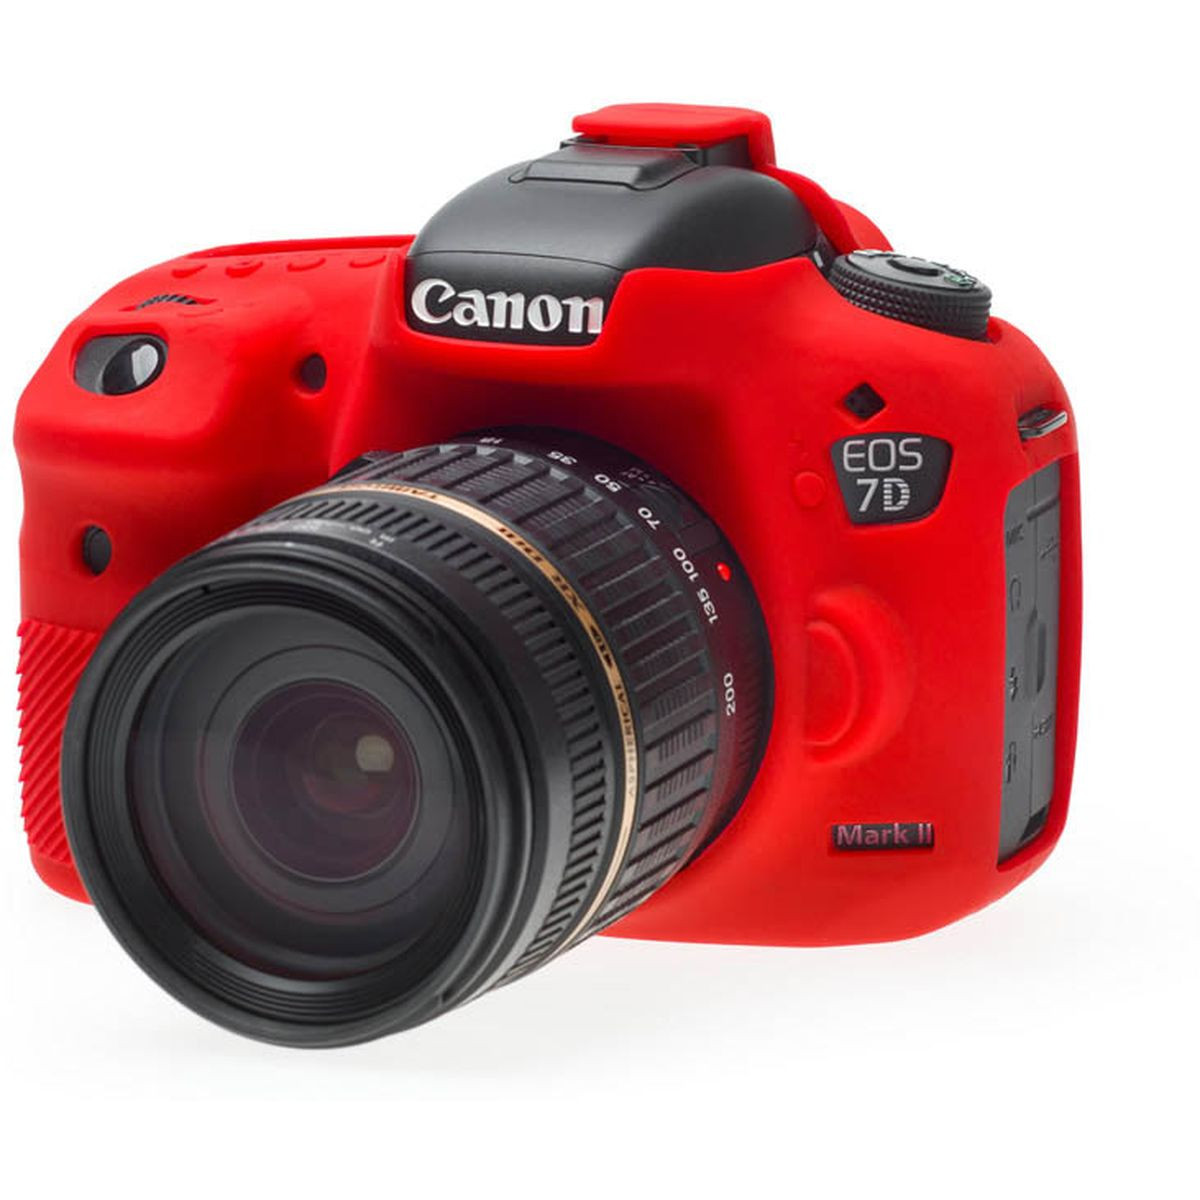 easyCover bodycover for Canon 7D Mark II Red